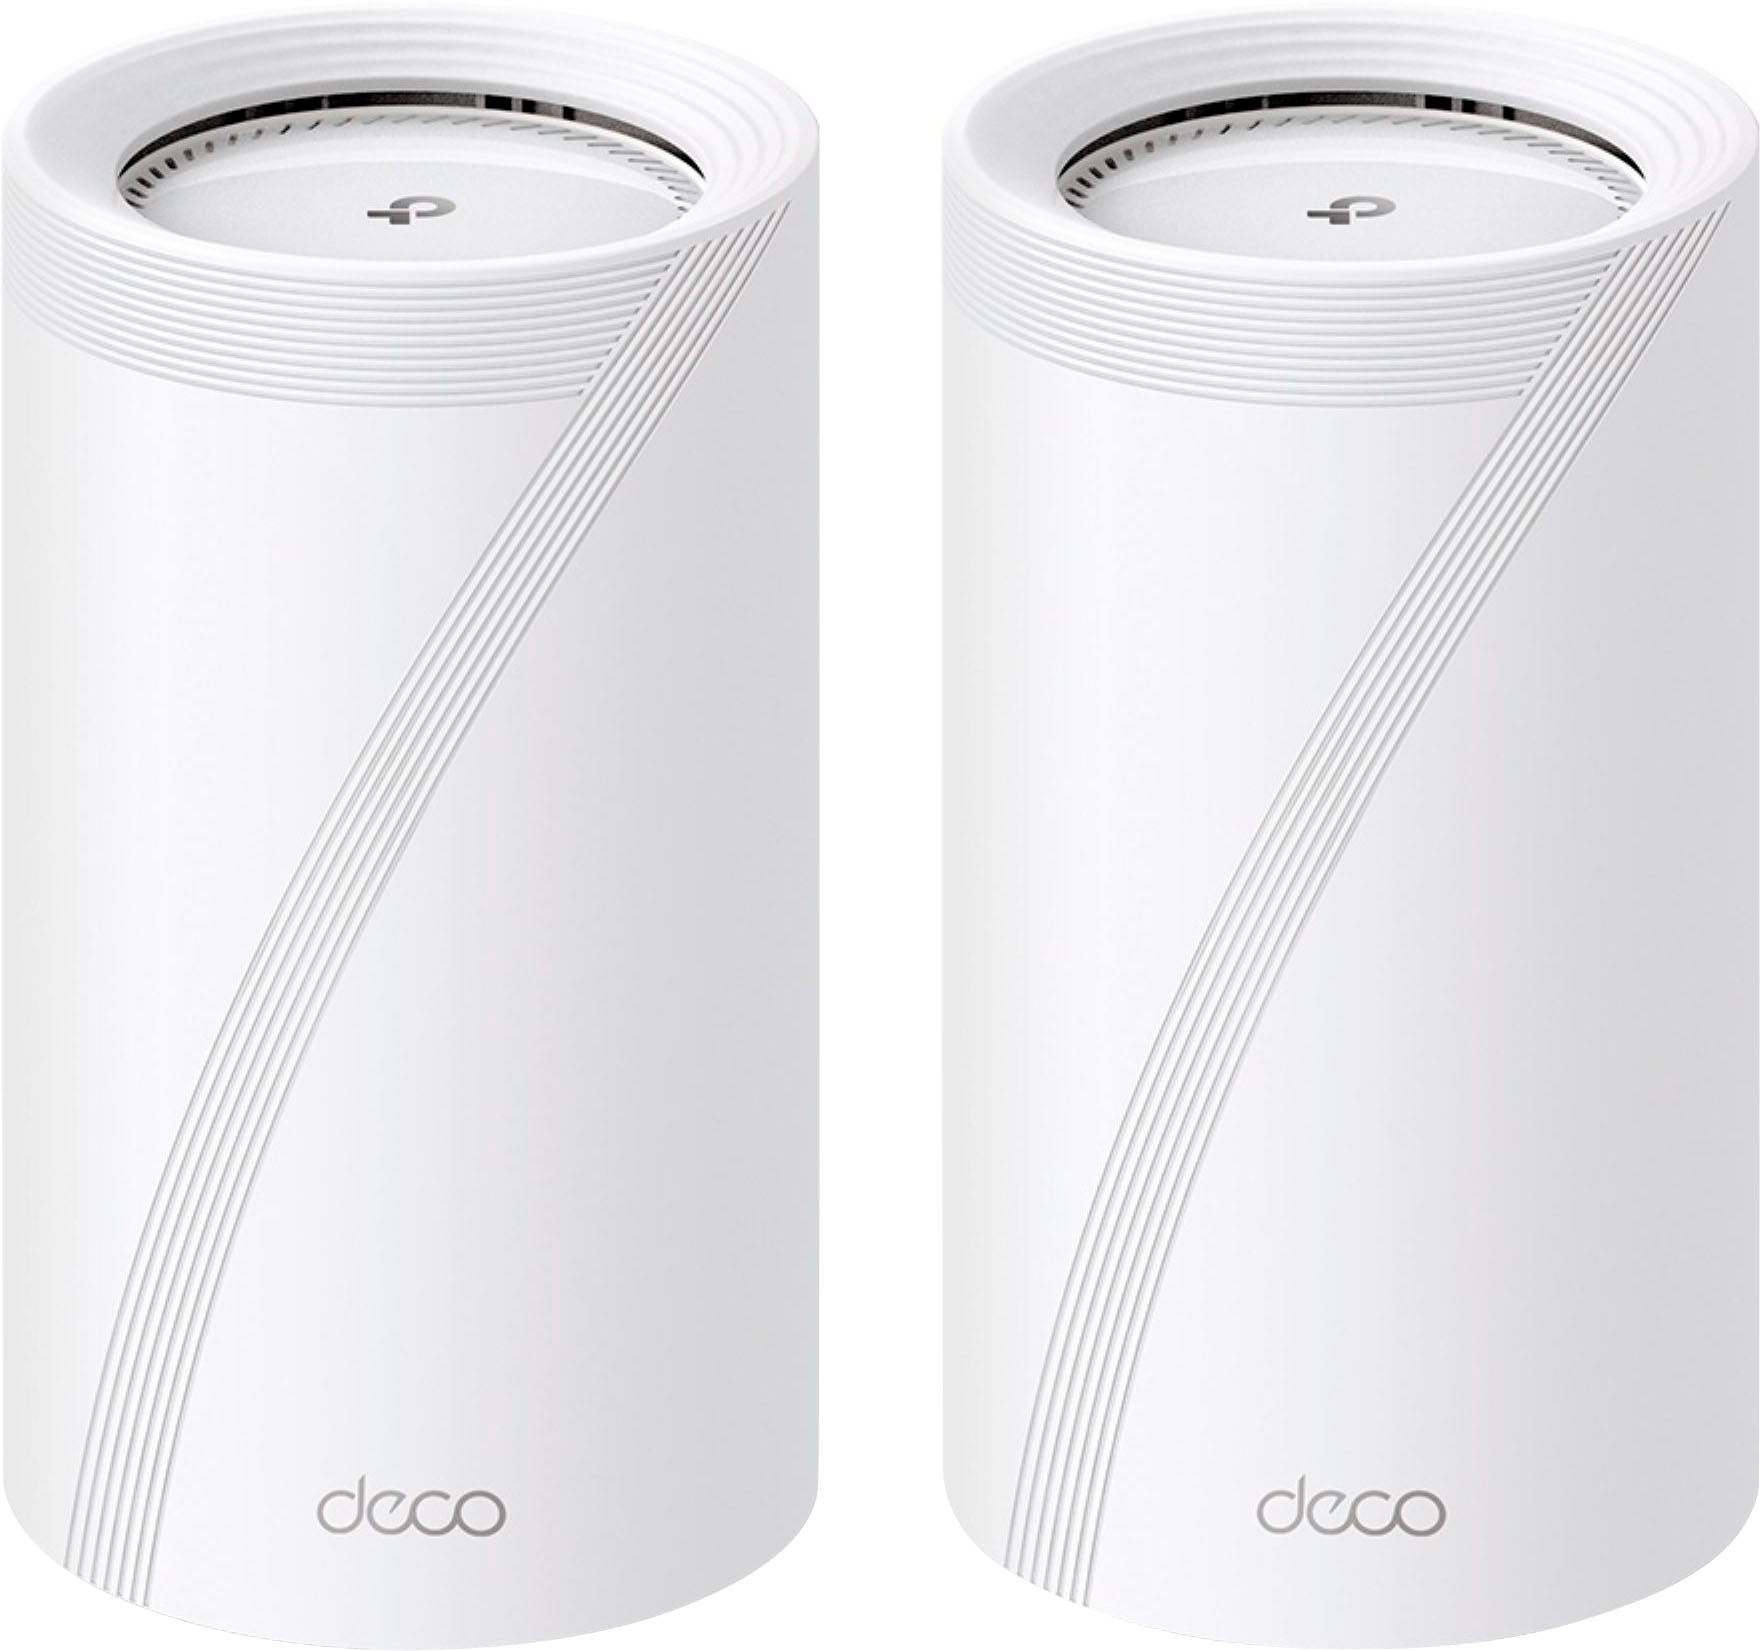 Great Value, Tp-Link Deco M4 Ac1200 Whole Home Mesh Wi-Fi System